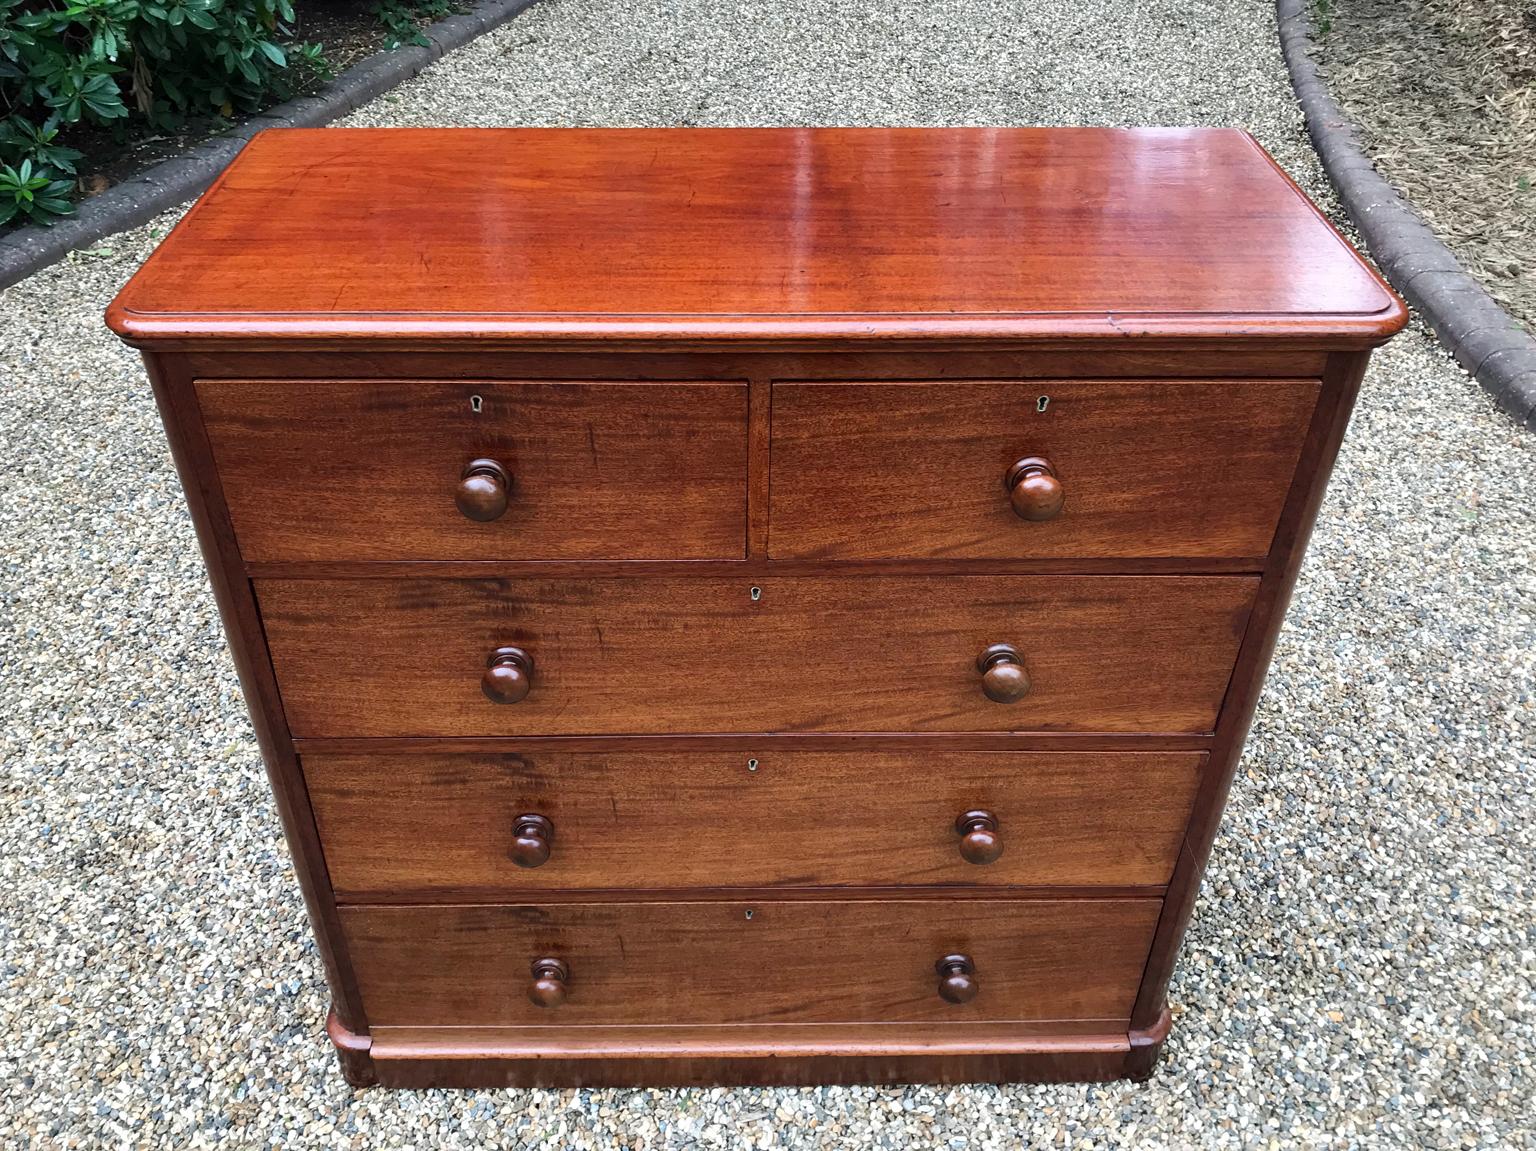 19th Century Victorian Mahogany Chest of Drawers In Good Condition For Sale In Richmond, London, Surrey